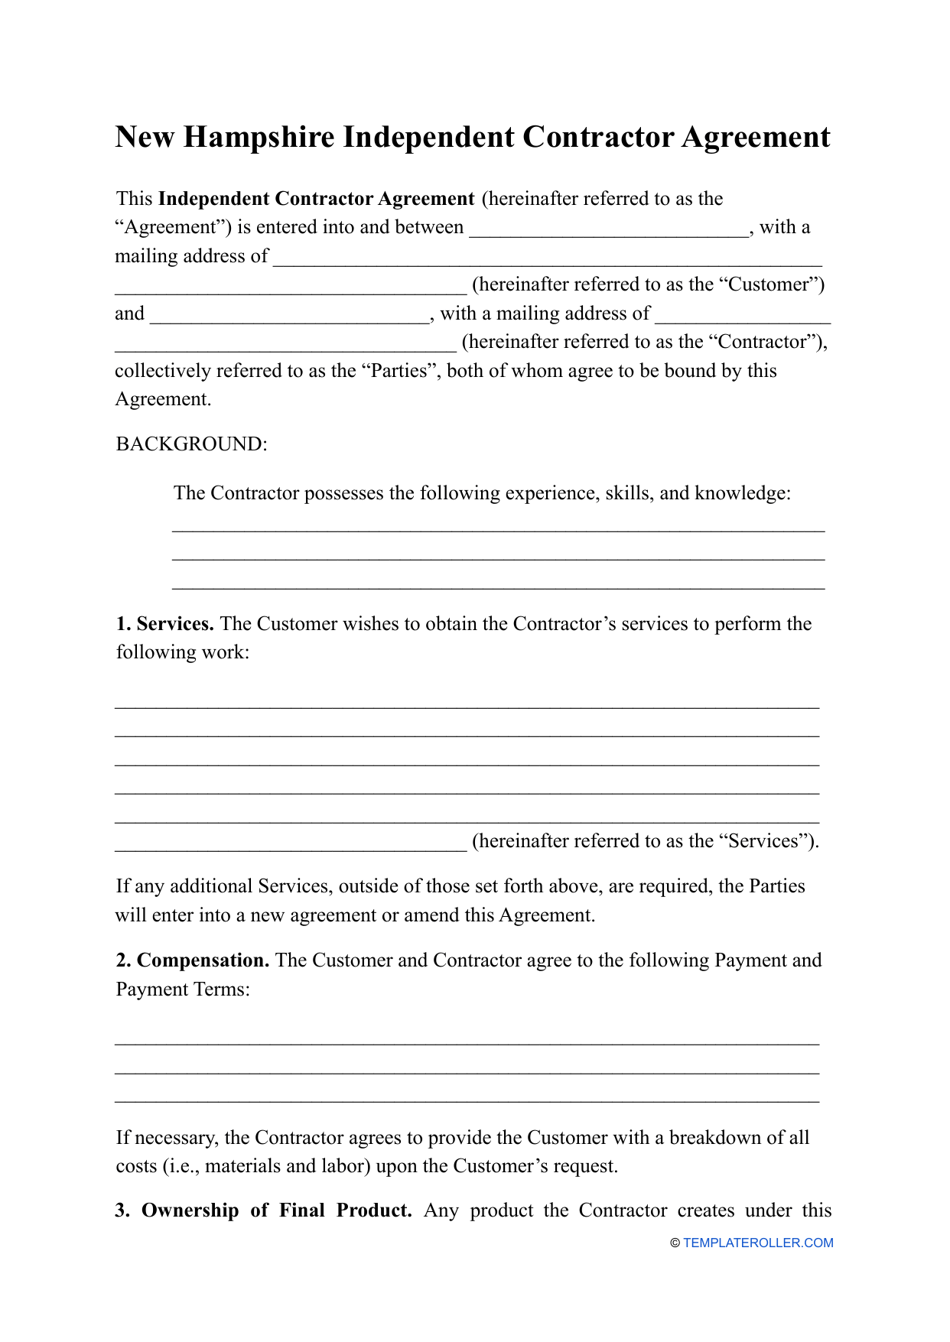 Independent Contractor Agreement Template - New Hampshire, Page 1